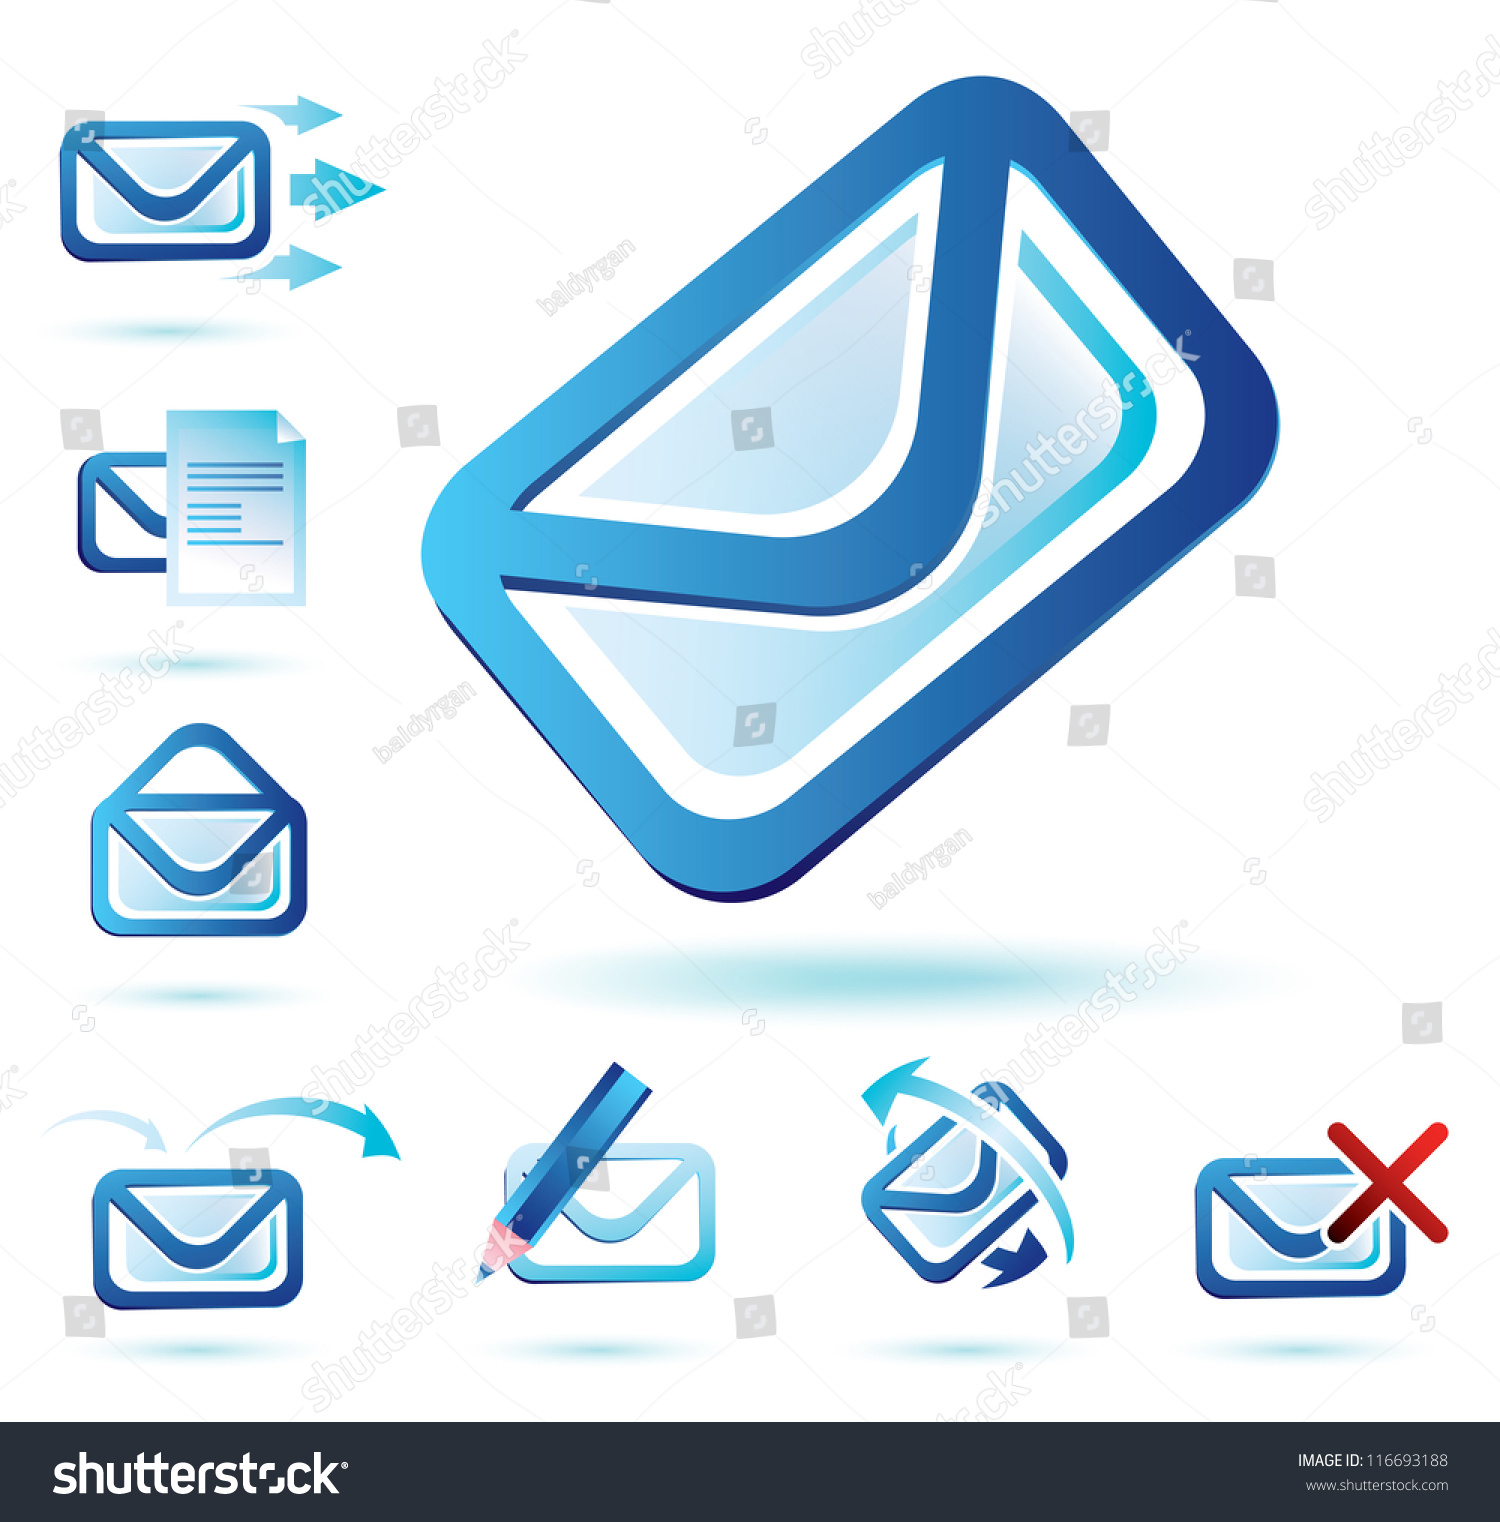 Email Icons Set, Isolated Glossy Vector Symbols - 116693188 : Shutterstock